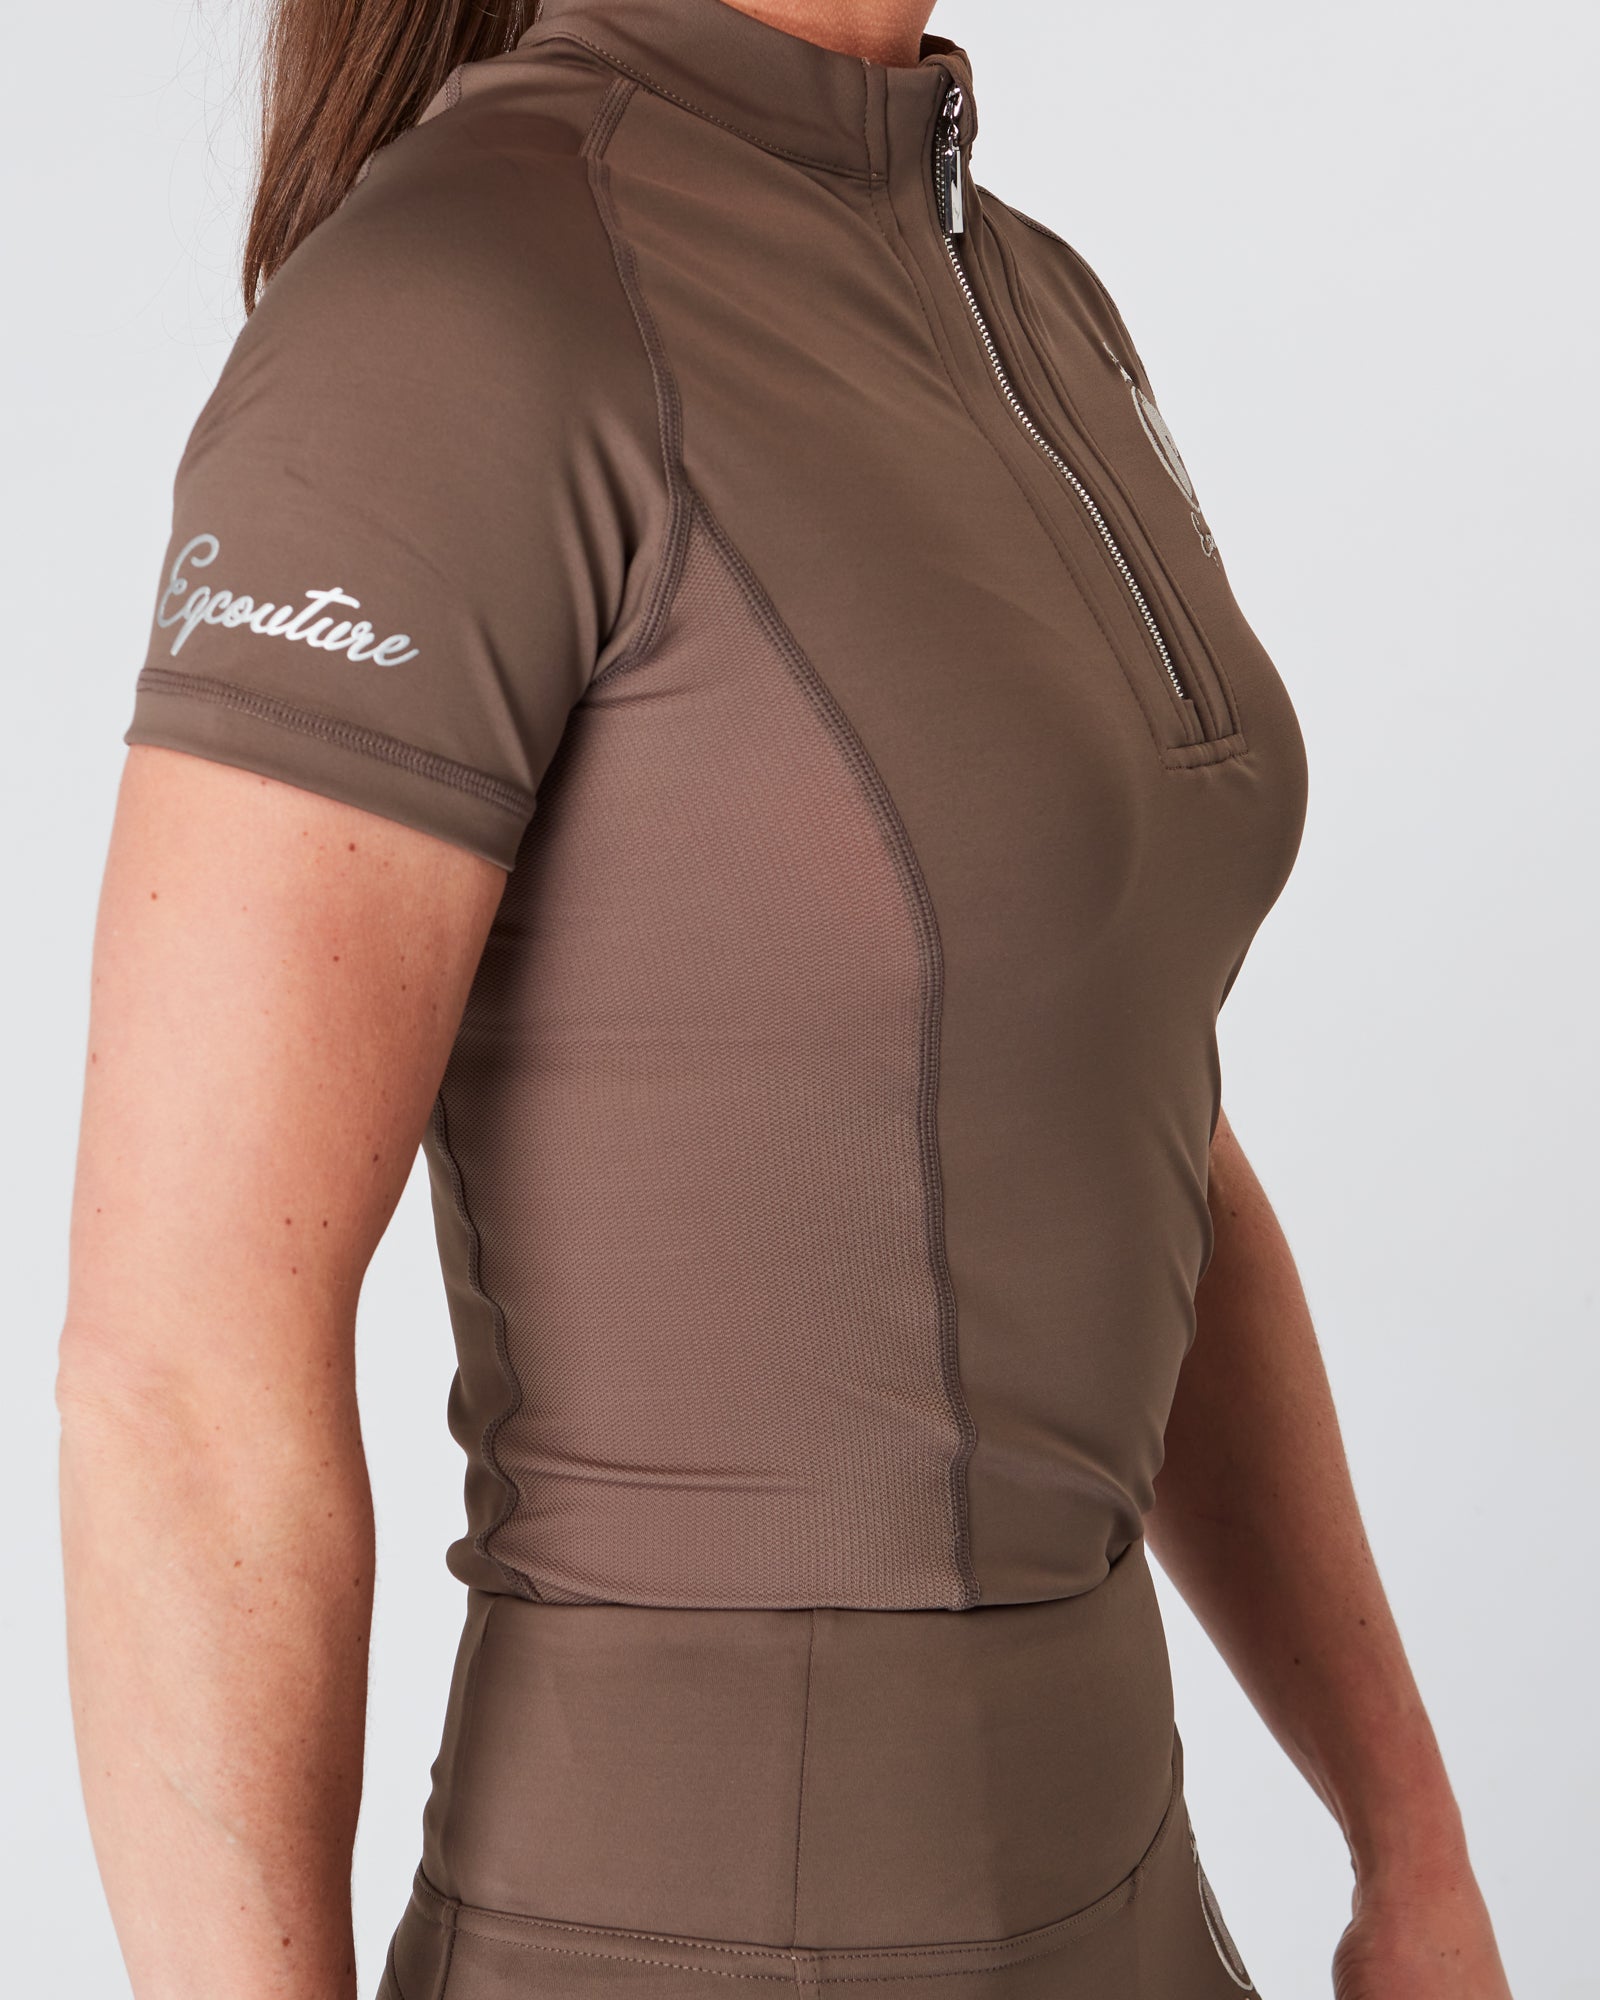 Equestrian brown short sleeve riding top / base layer / sports riding top- Eqcouture.